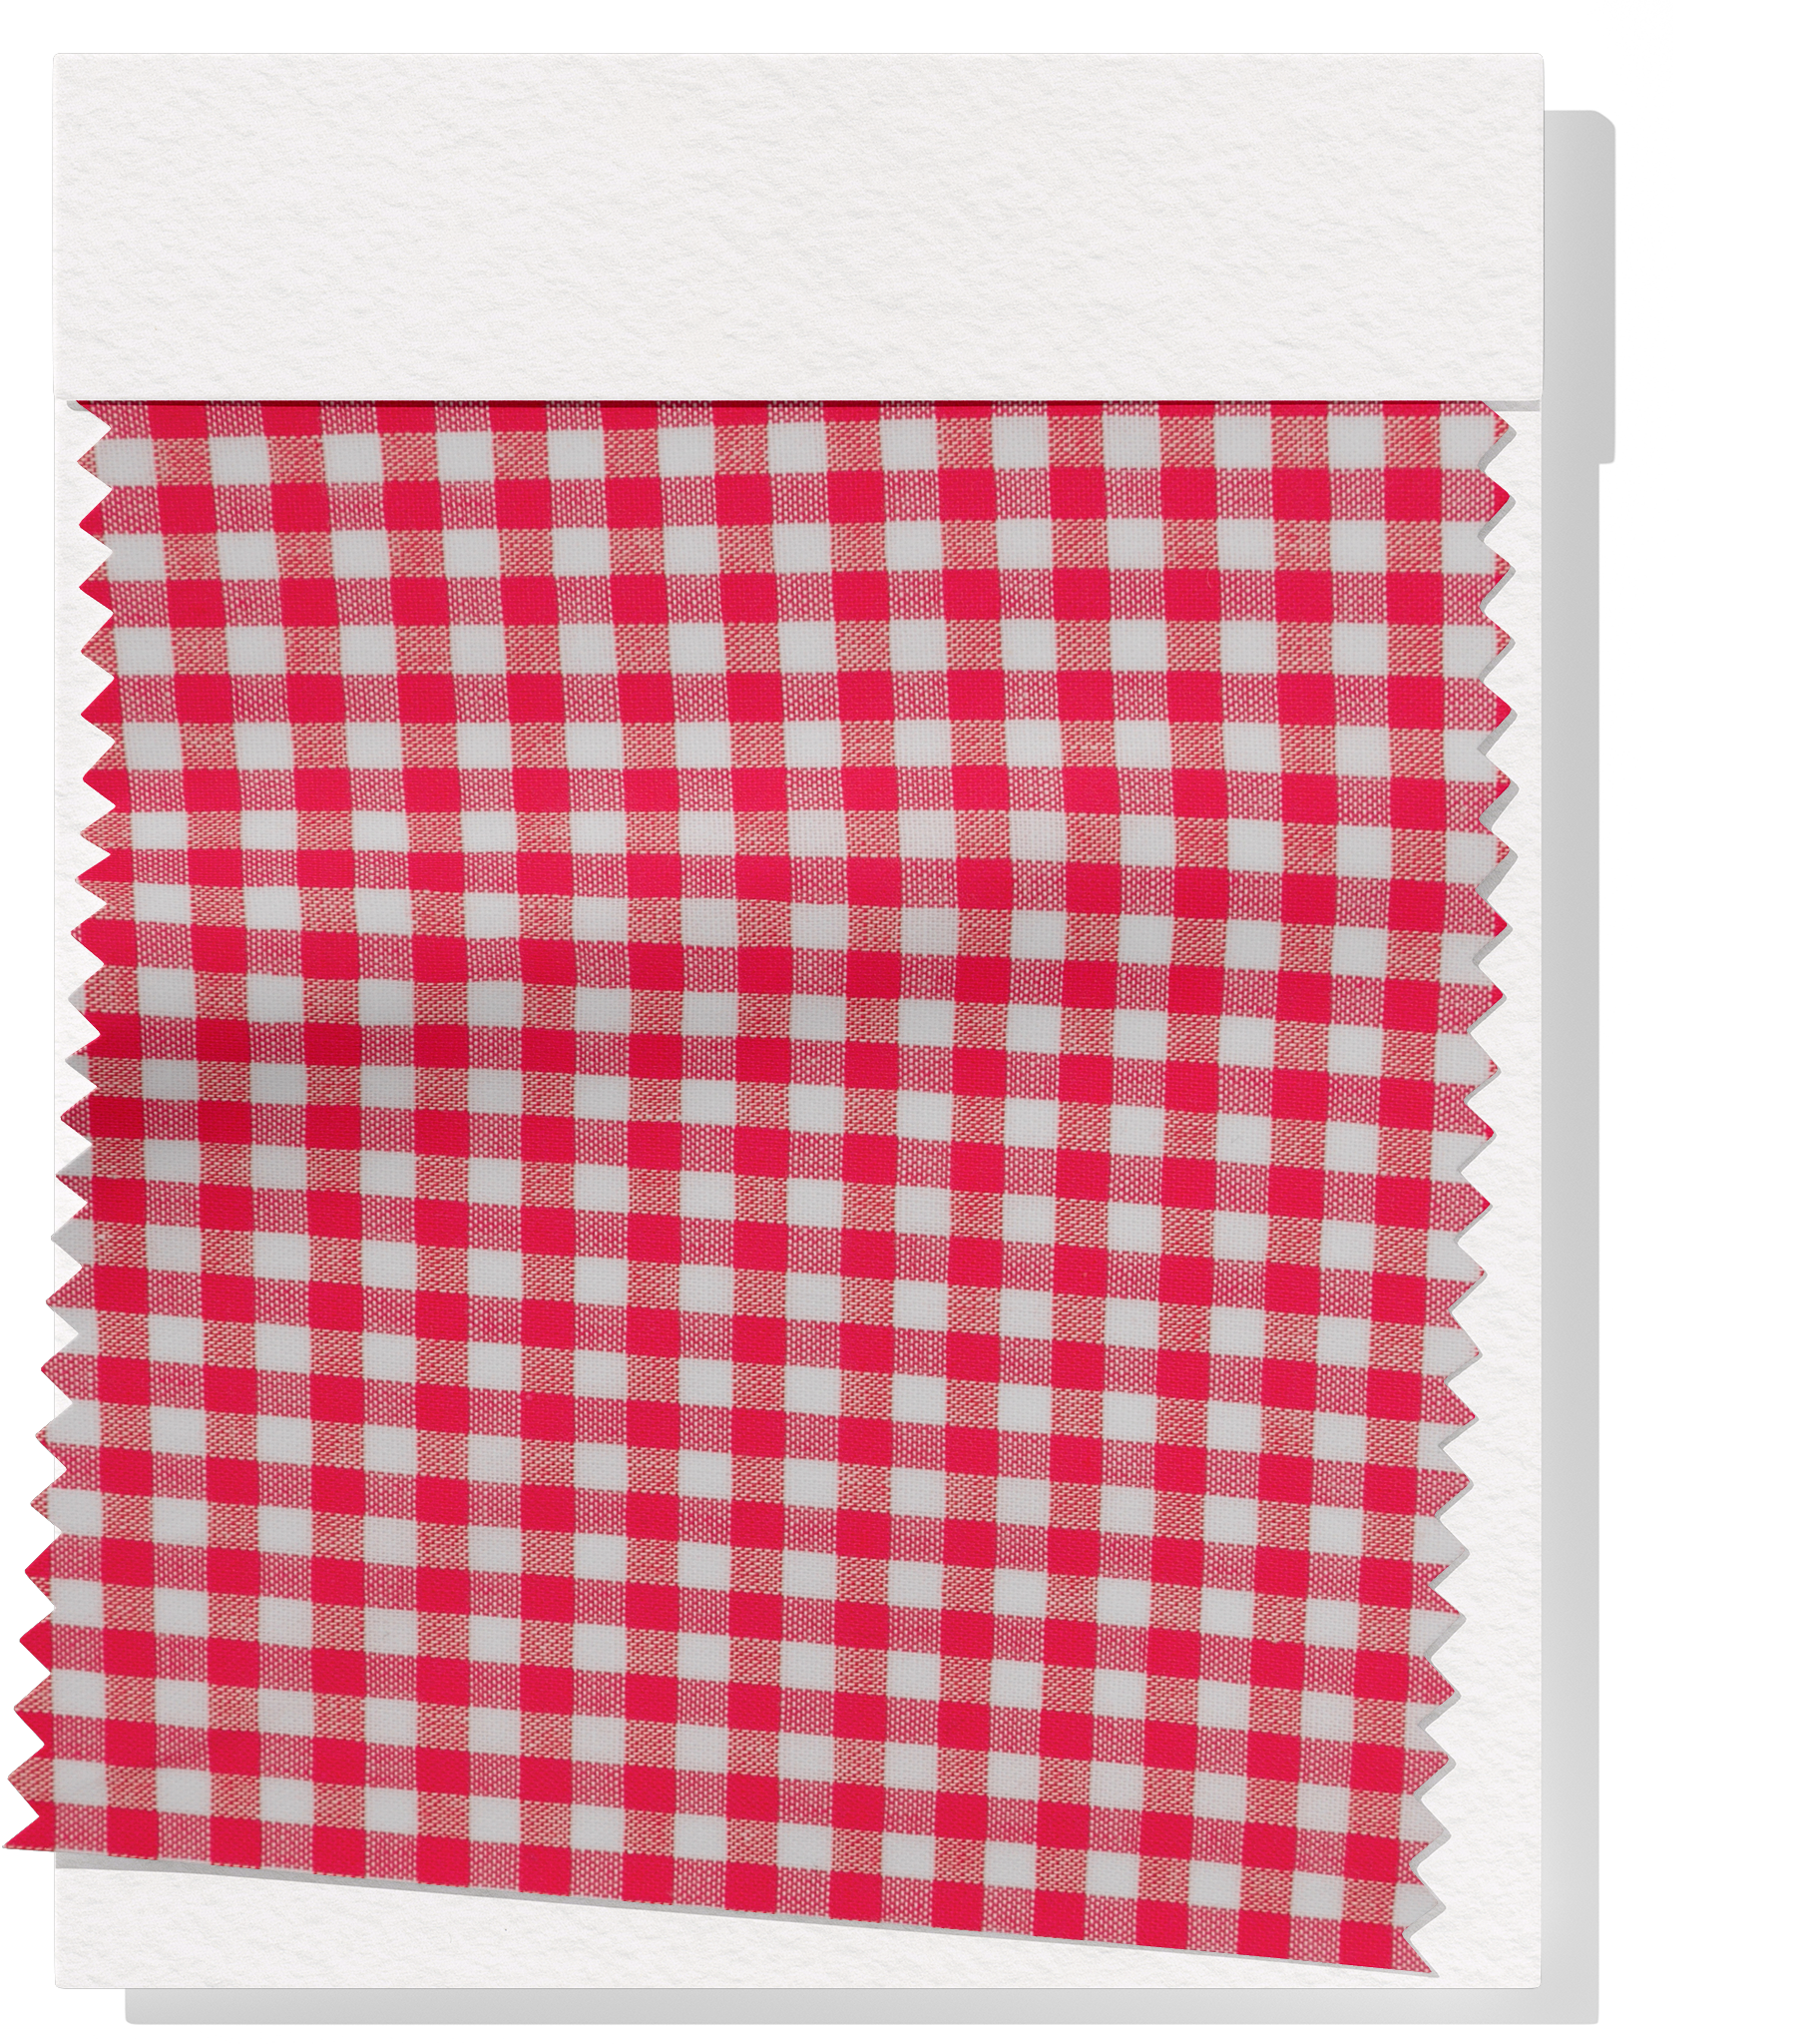 Cotton Gingham Print $14.00p/m - Cherry Red & White (Small)